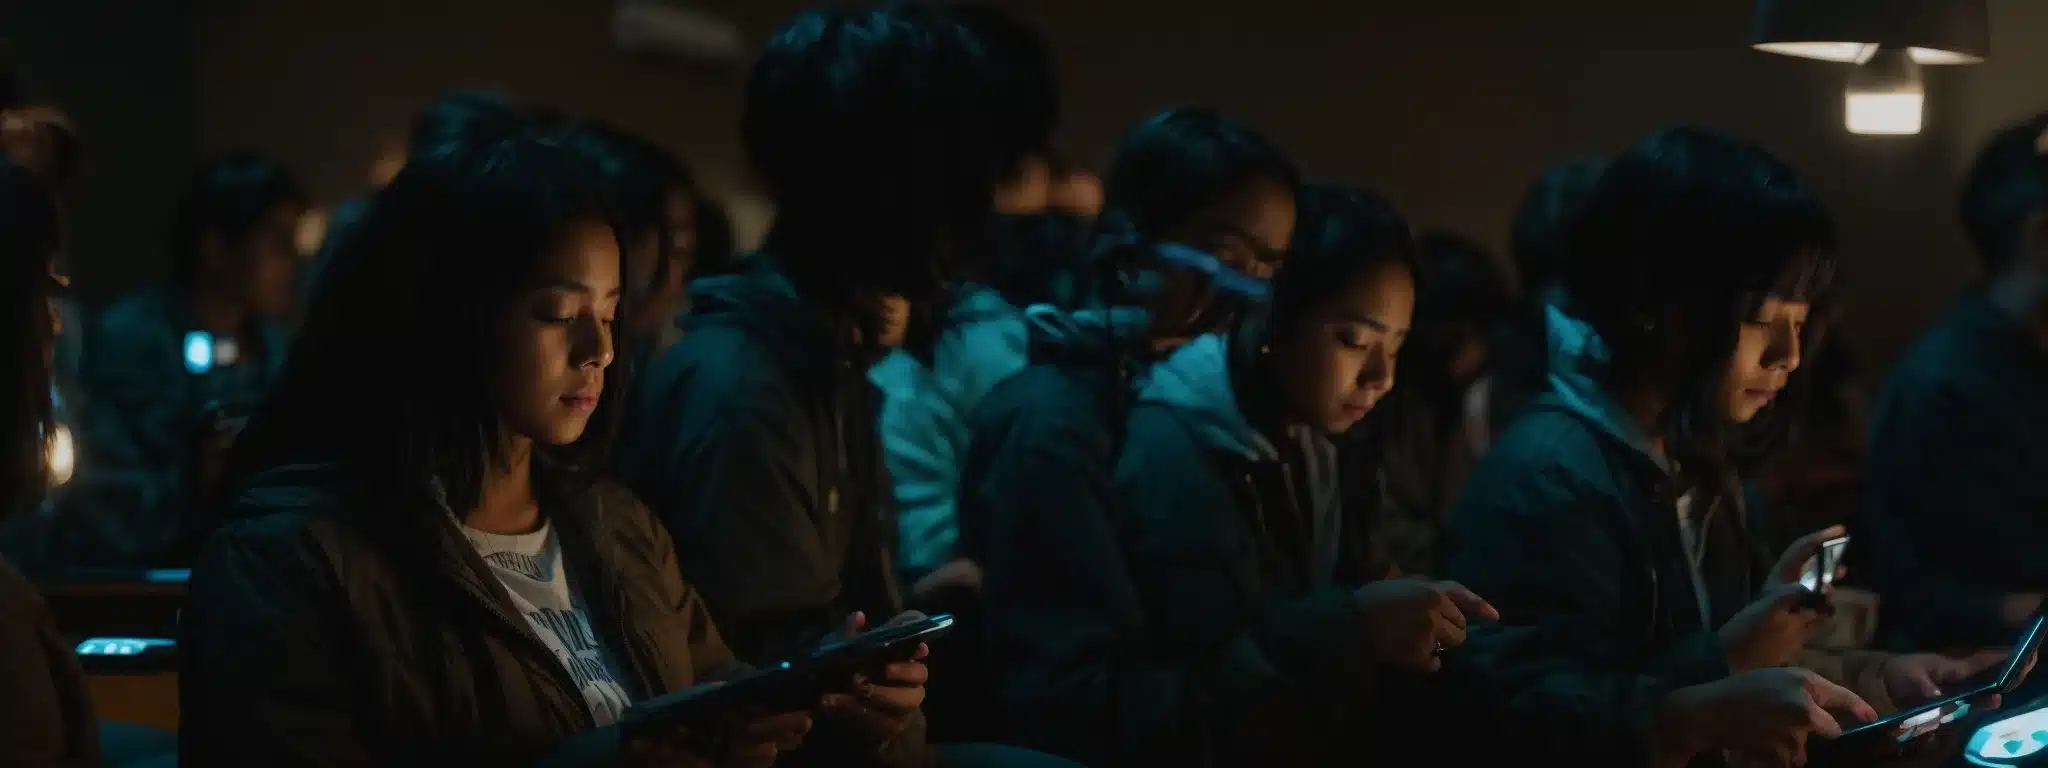 A Diverse Group Of People Engaging With Smartphones And Tablets, Brightly Illuminated By Their Screens In A Dim Room.